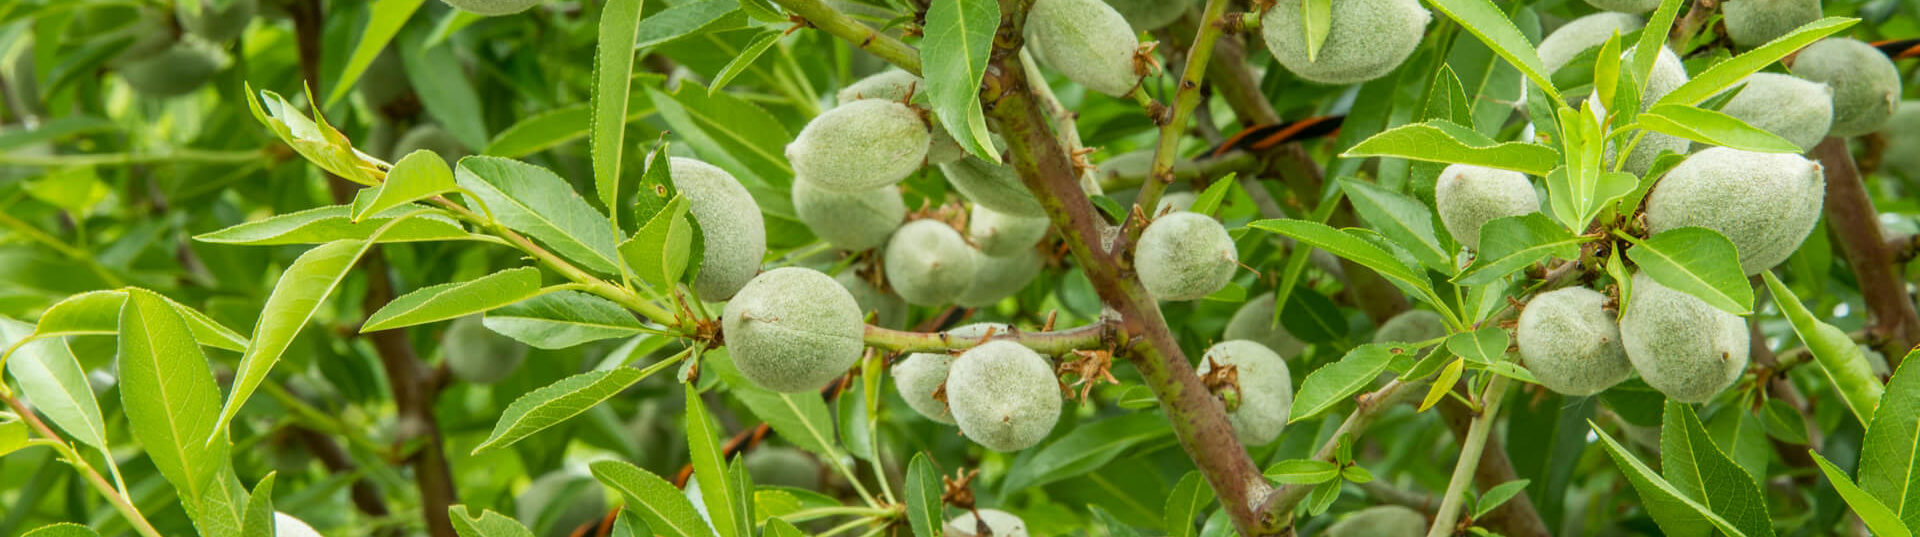 Rivulis partners with Agri-tech farm Veracruz Almonds in a pioneering trial.